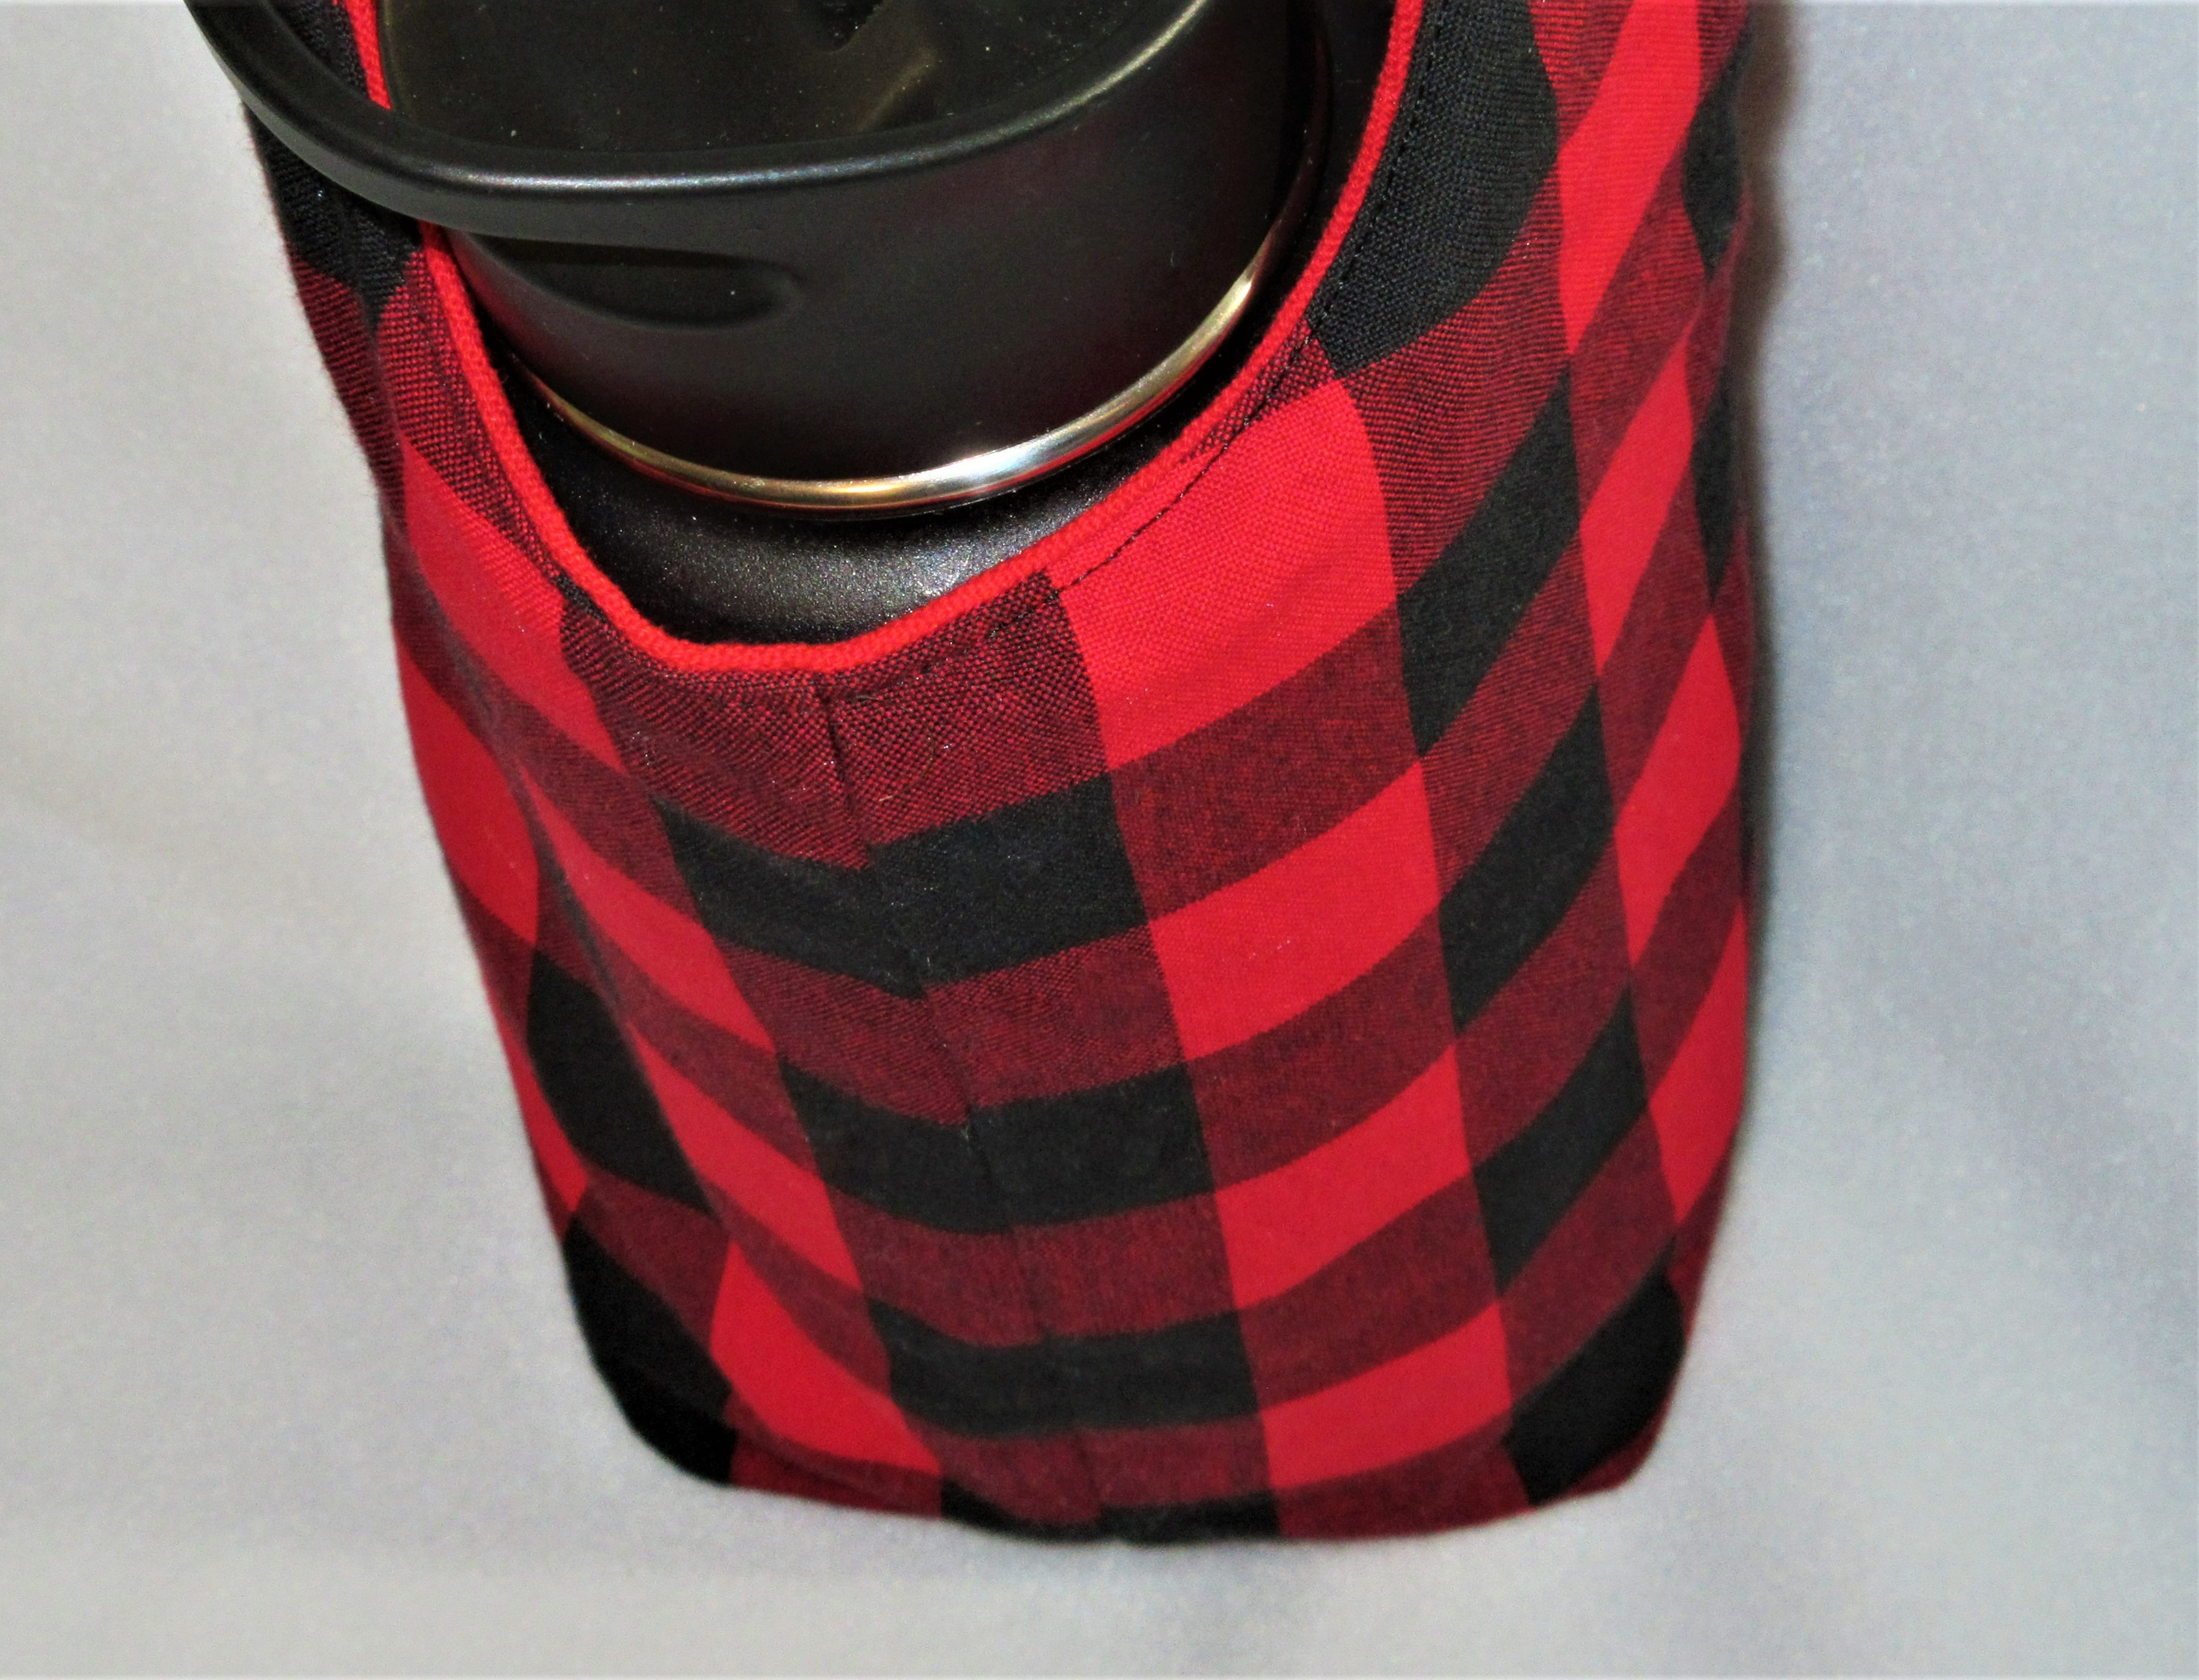 personalized water bottle holder buffalo plaid tumbler carrier red and black by a fur baby favorite